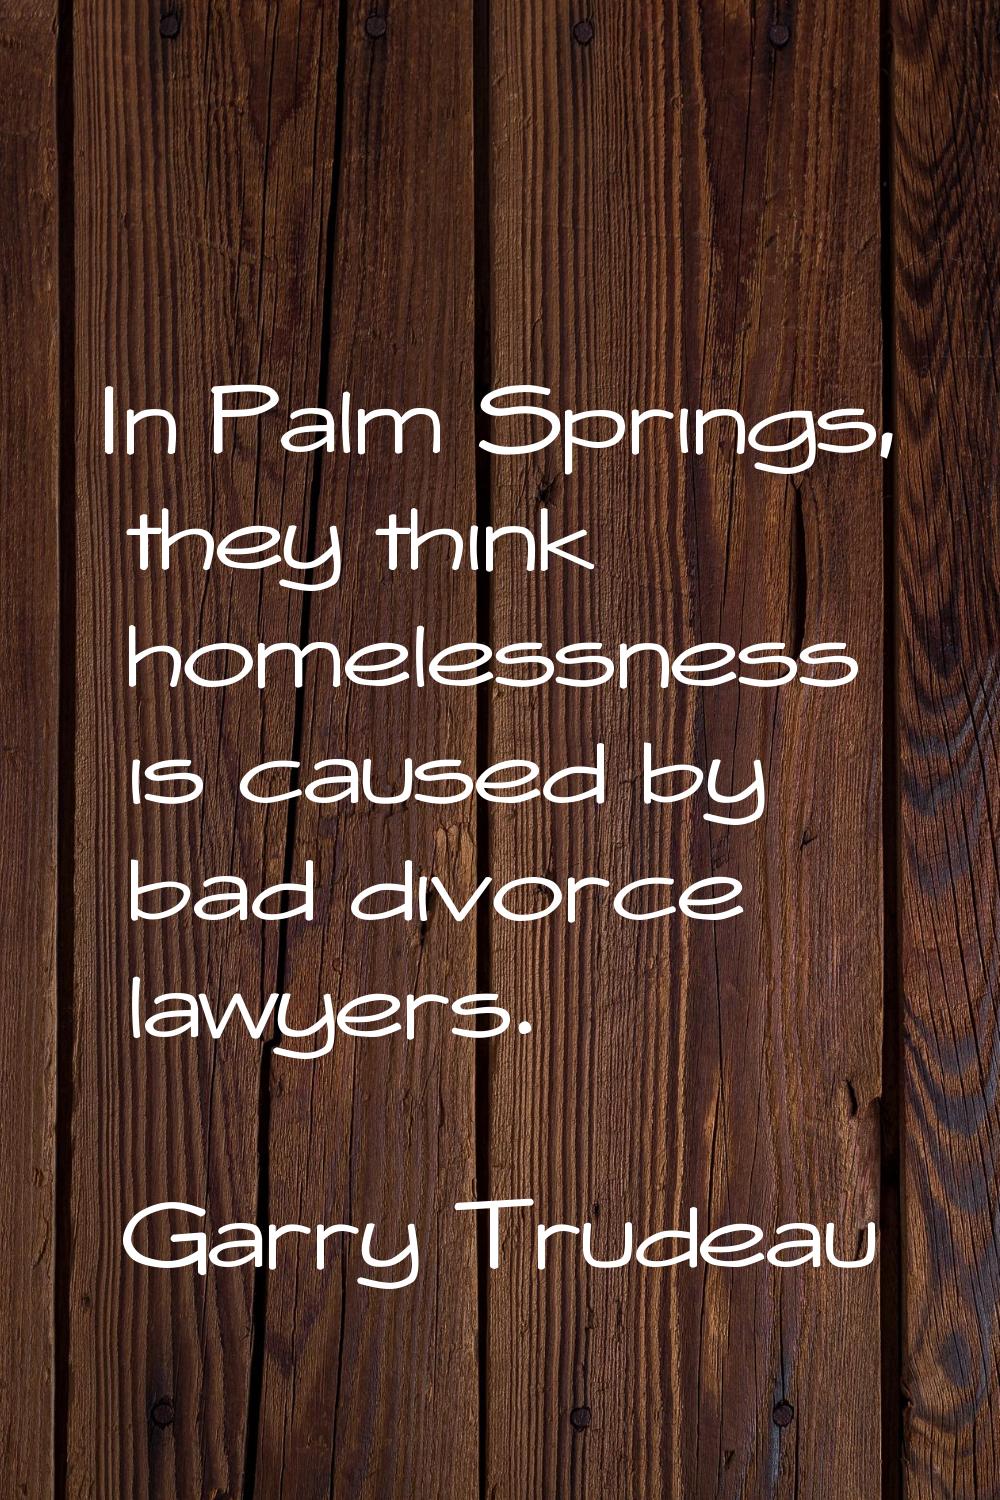 In Palm Springs, they think homelessness is caused by bad divorce lawyers.